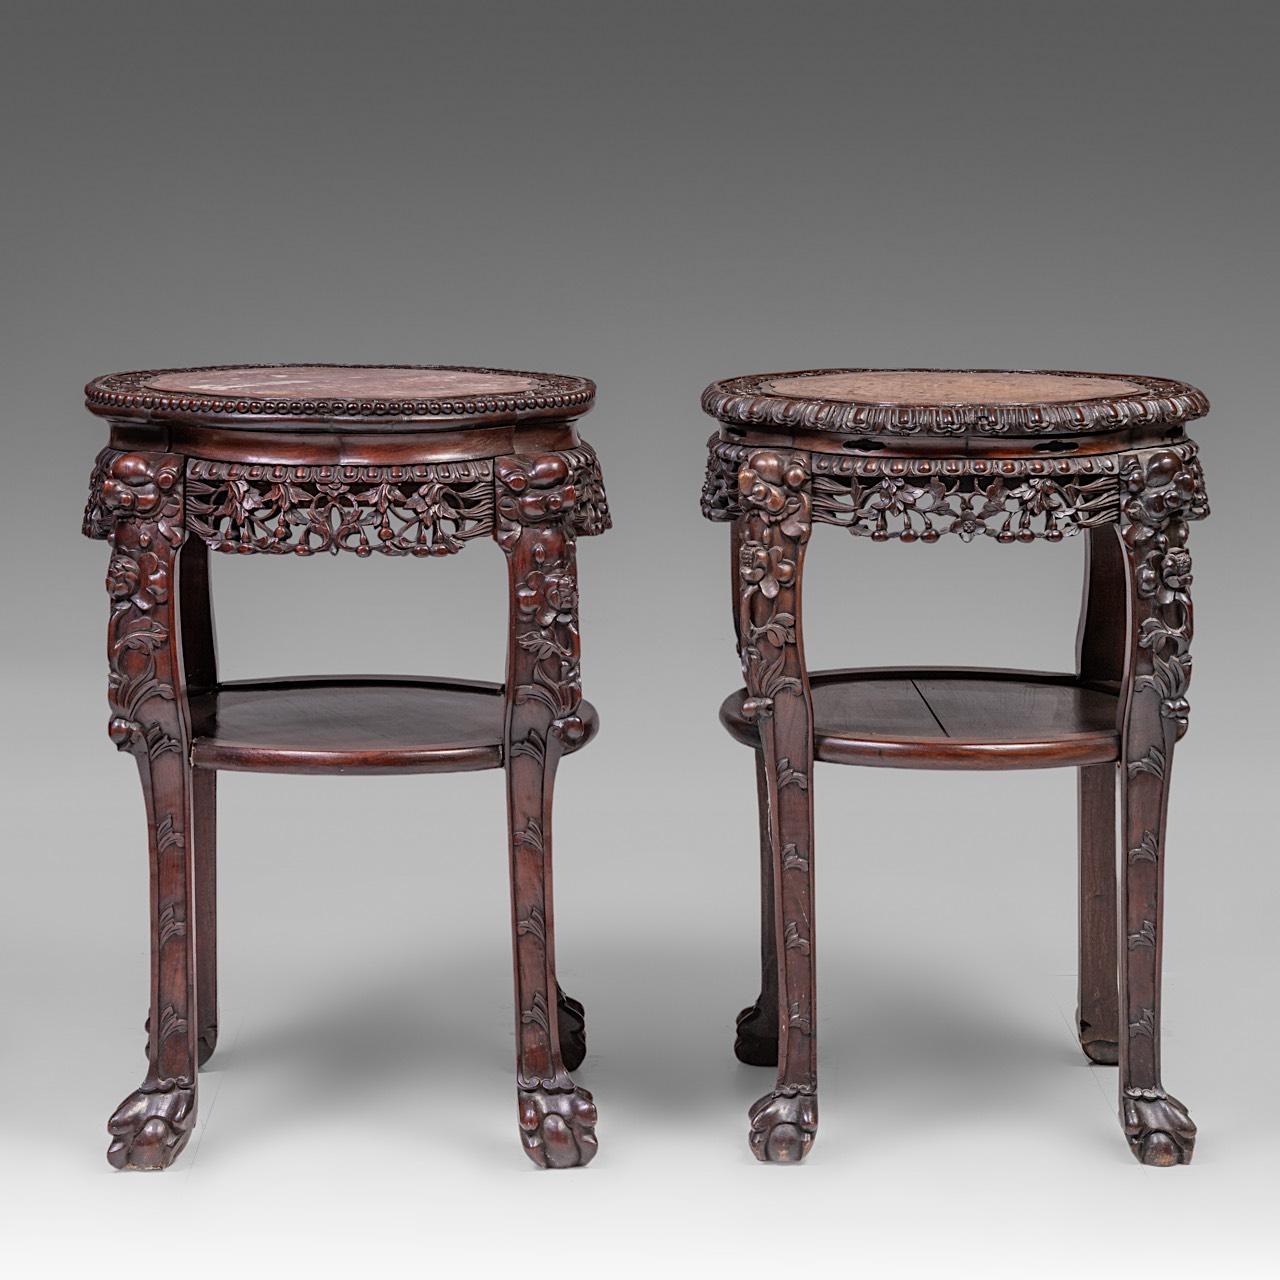 A small collection of four South Chinese carved hardwood bases, all with a marble top, late Qing, ta - Image 4 of 17